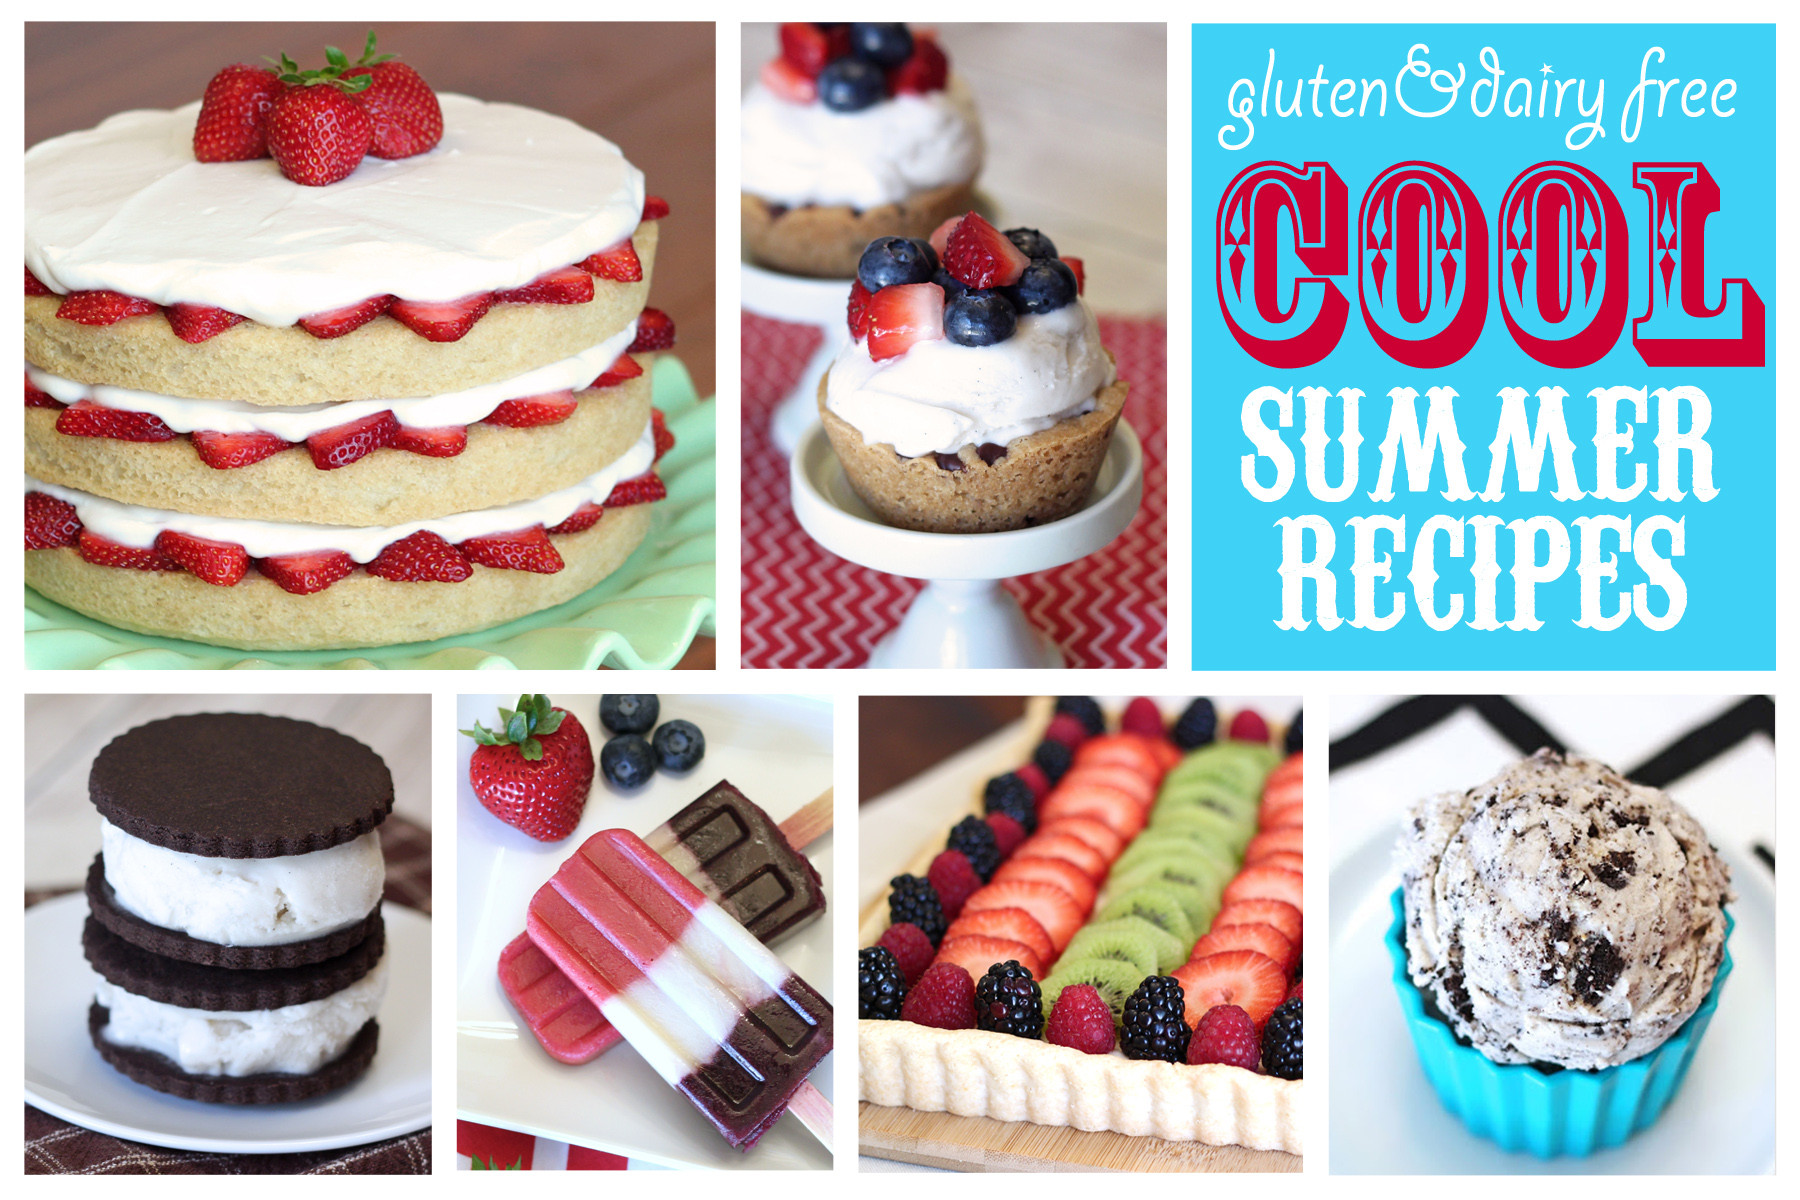 Gluten Free Summer Recipes
 Gluten Free and Dairy Free Summer Recipes Ask Anna